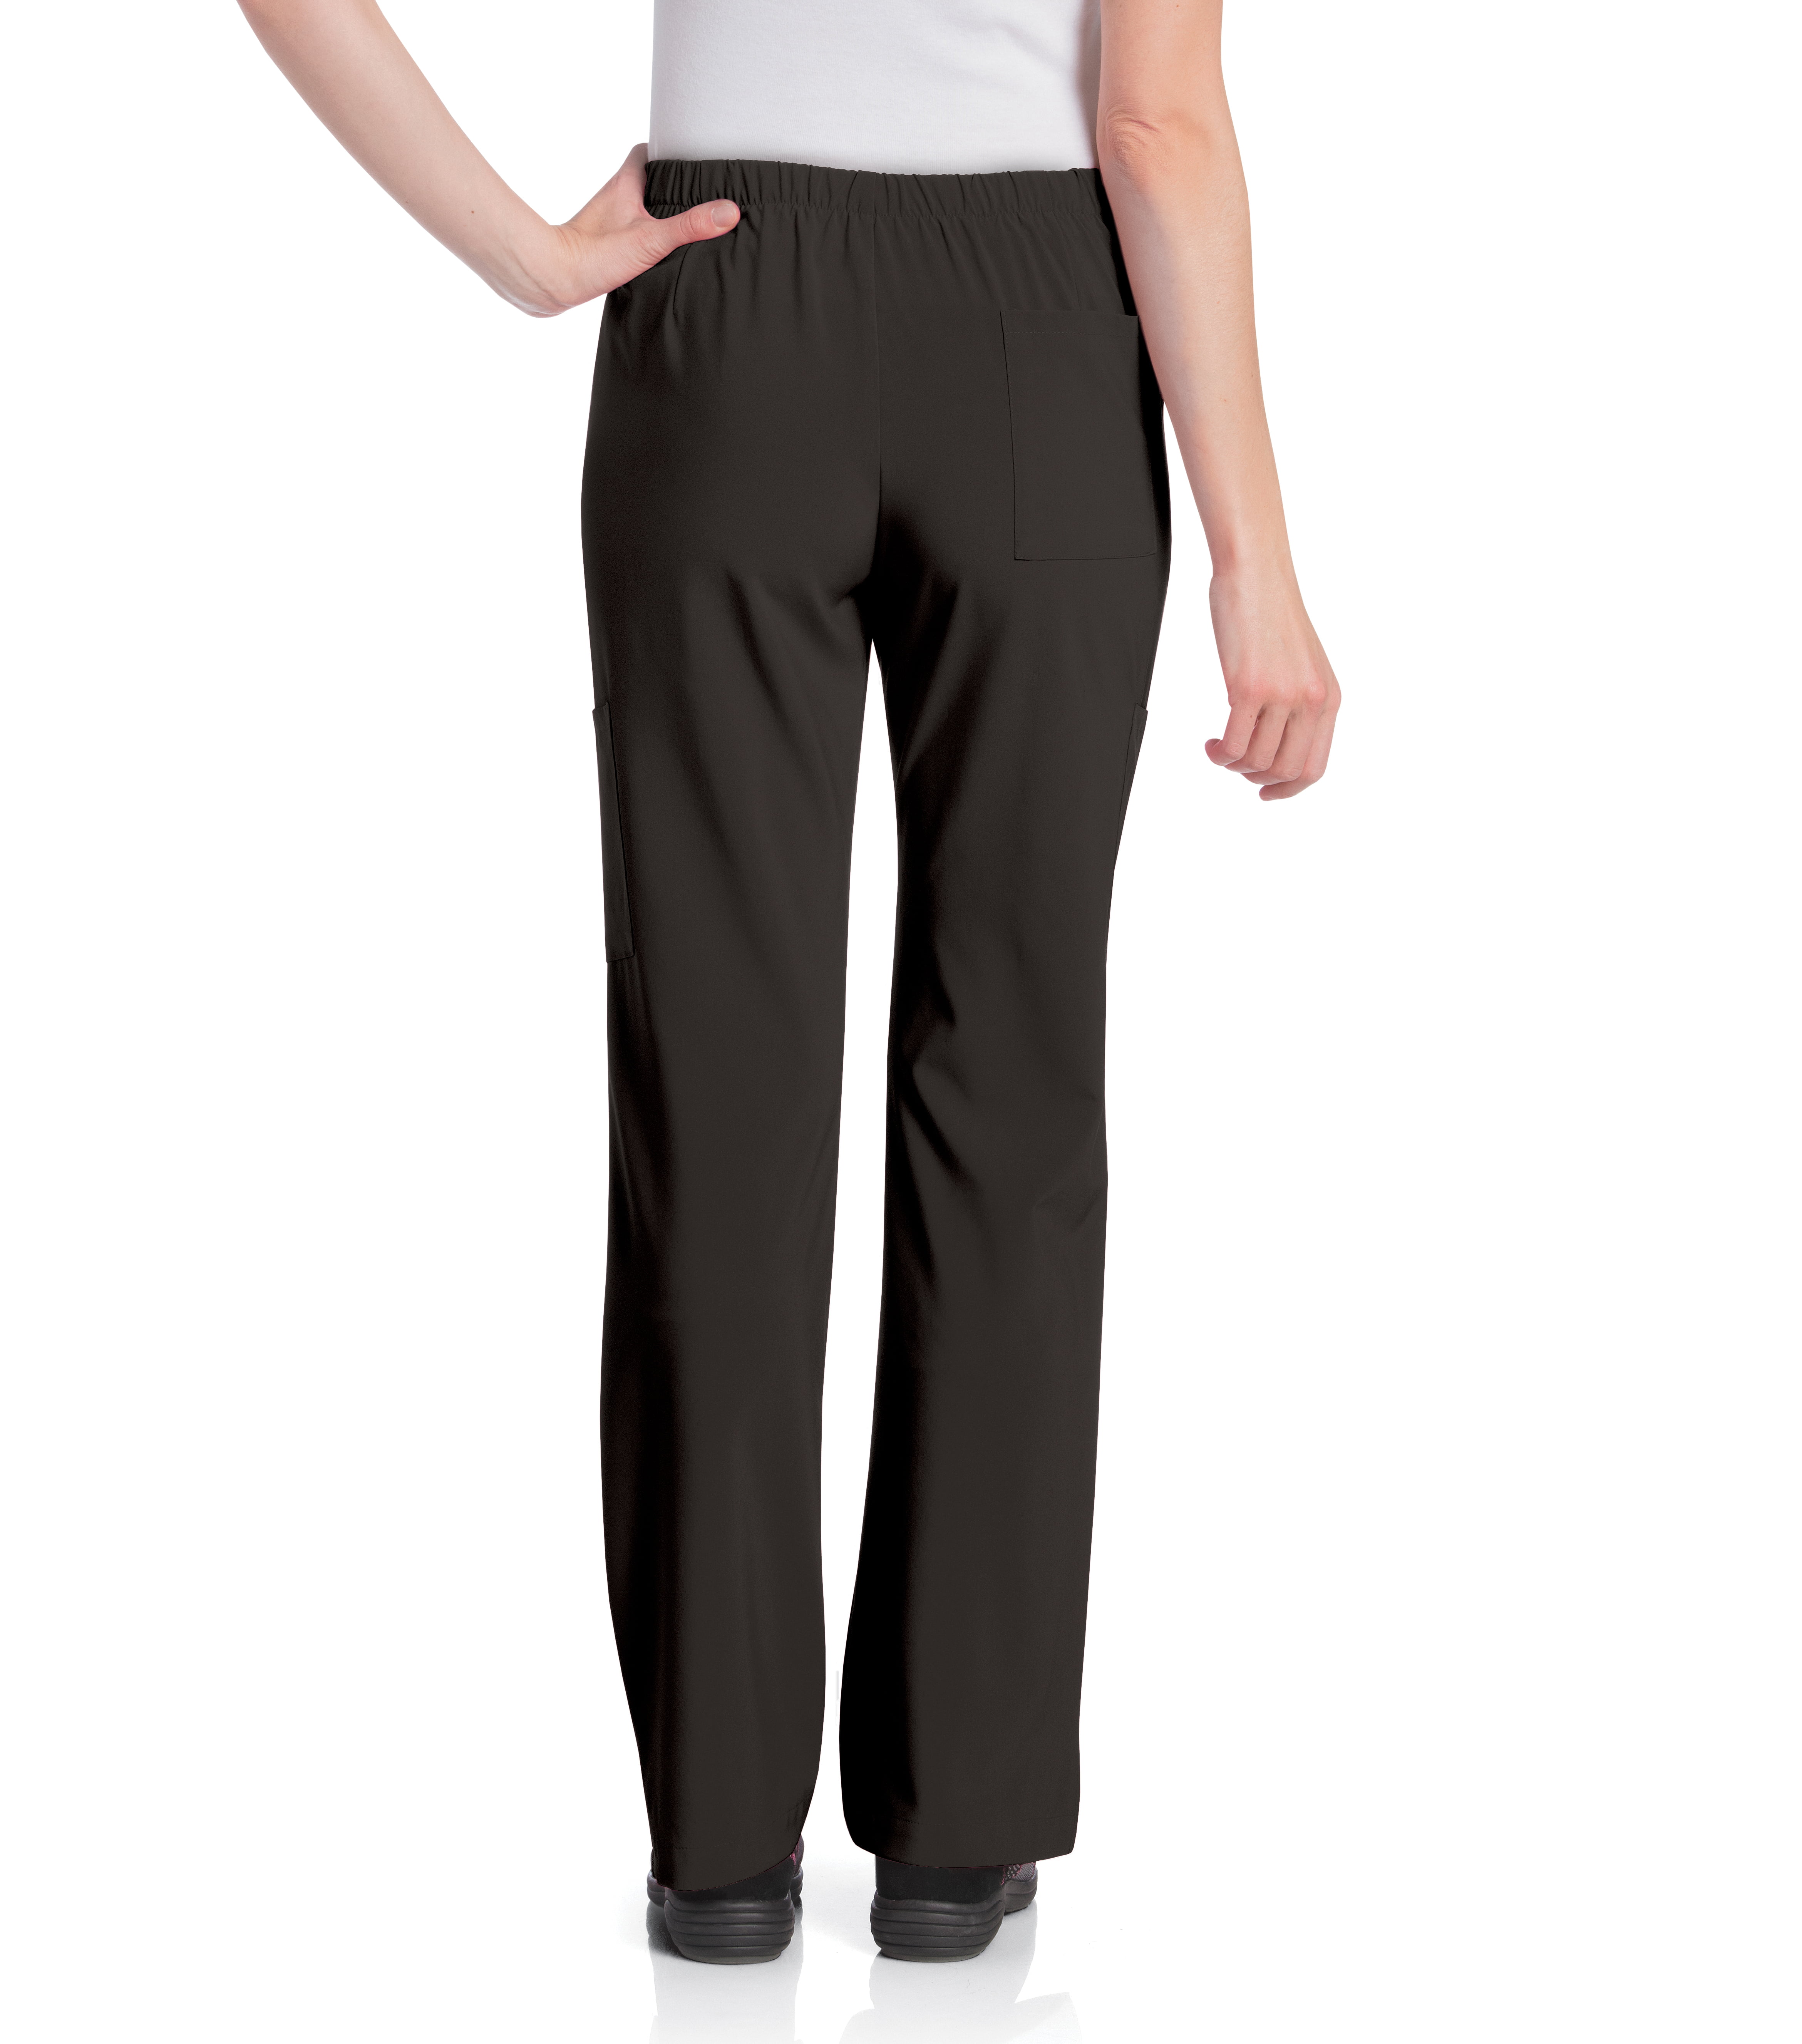 ave Scrubs 5570BLKXXLT Women's Medical Scrub Pant, Pacific Ave, Slimming  Straight Leg Style, Cargo Pockets, Great for Nurses, Black, 2X-Large Tall